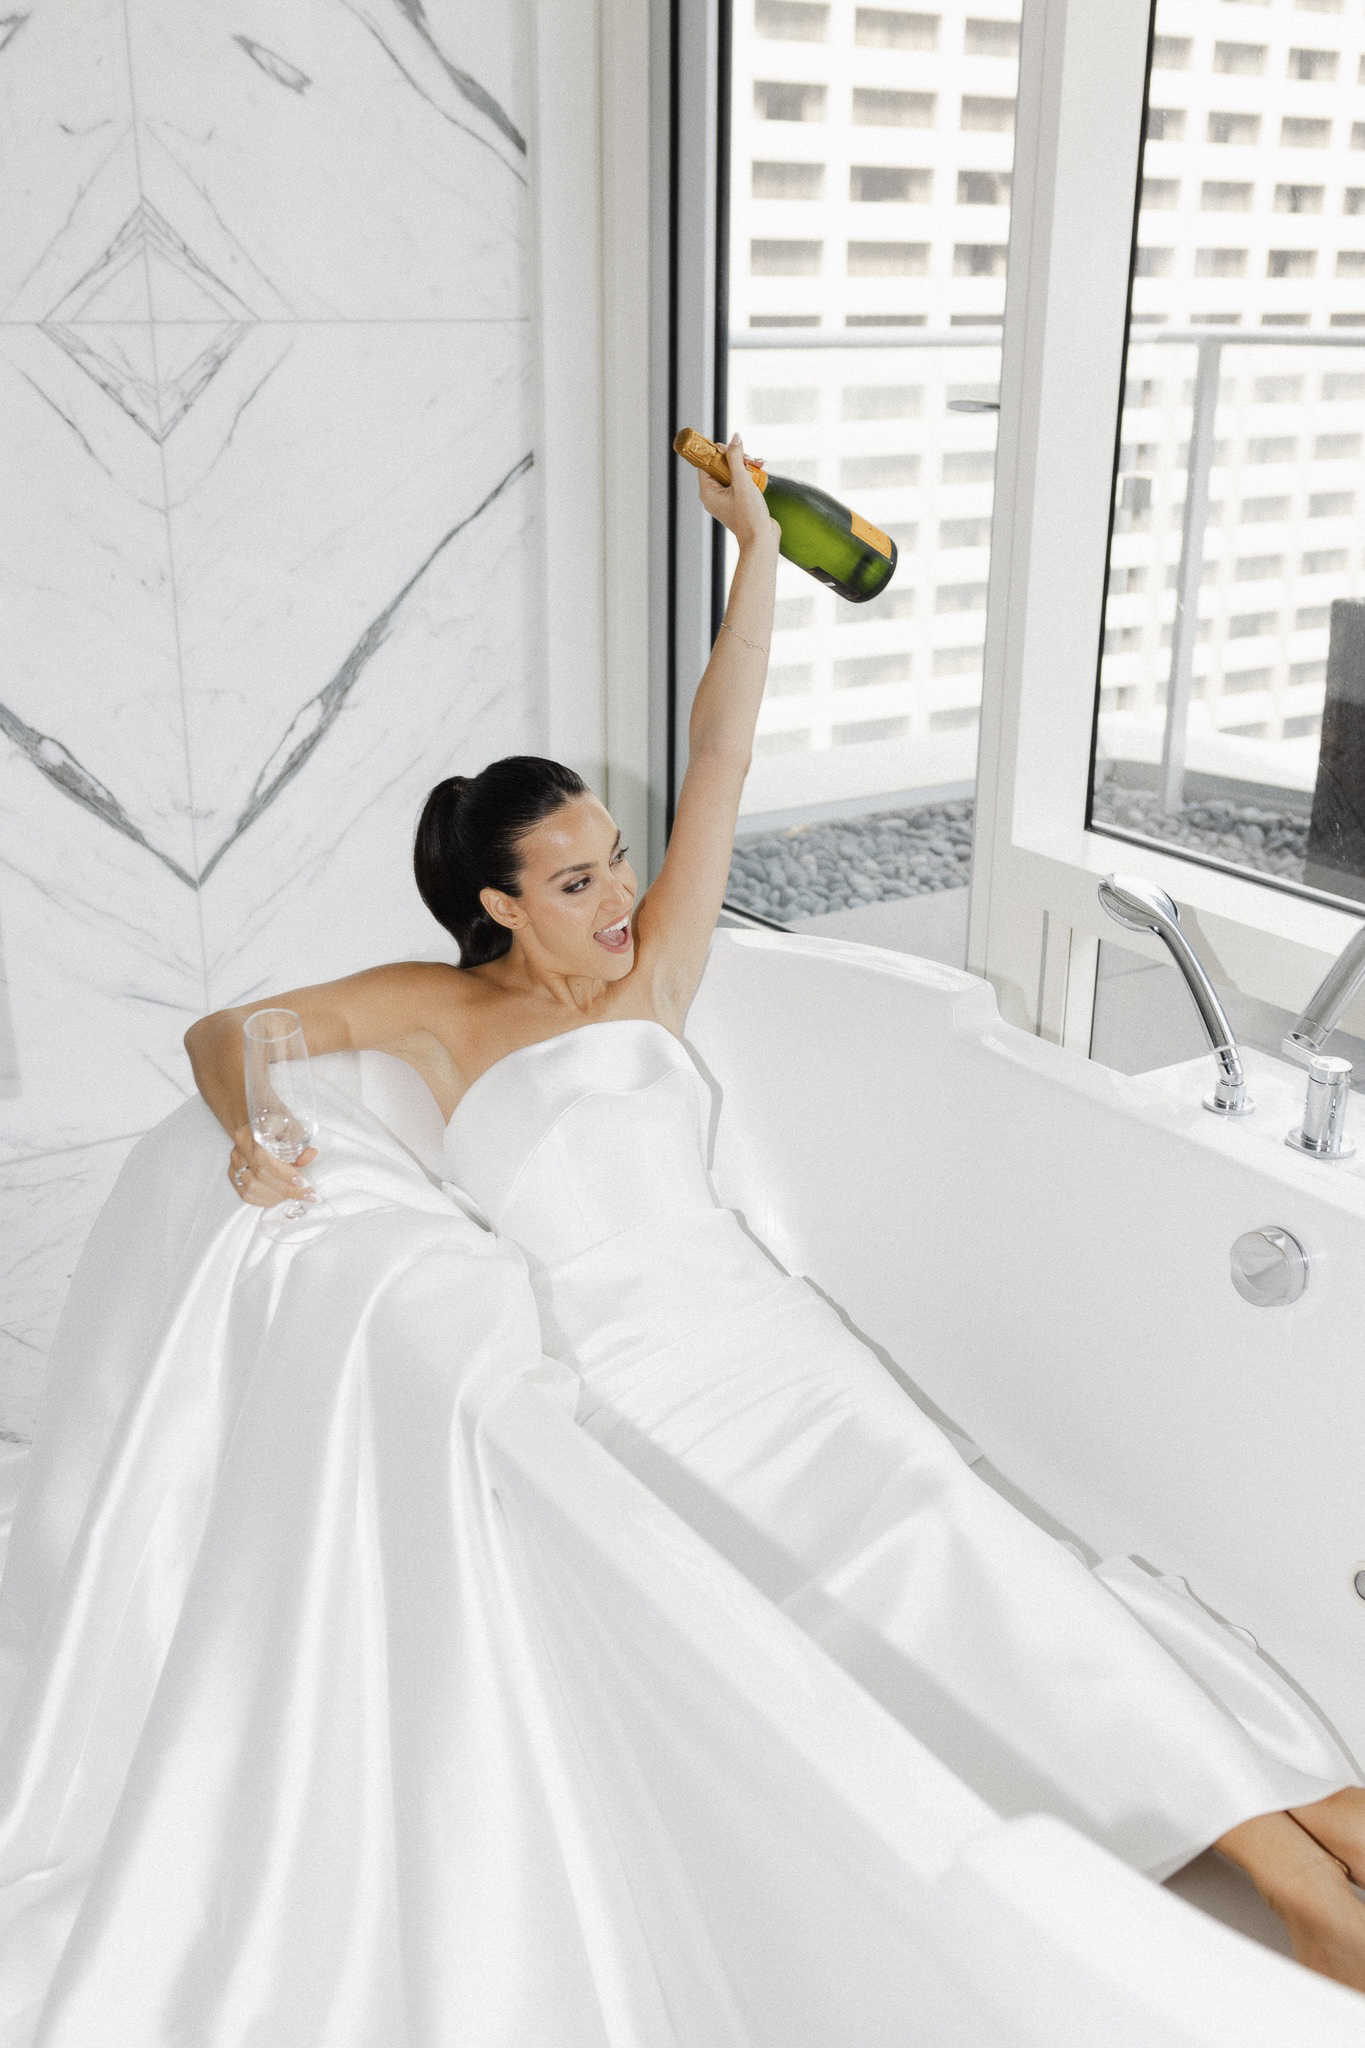 The bride in a wedding dress holding a bottle of champagne in a white bathtub.